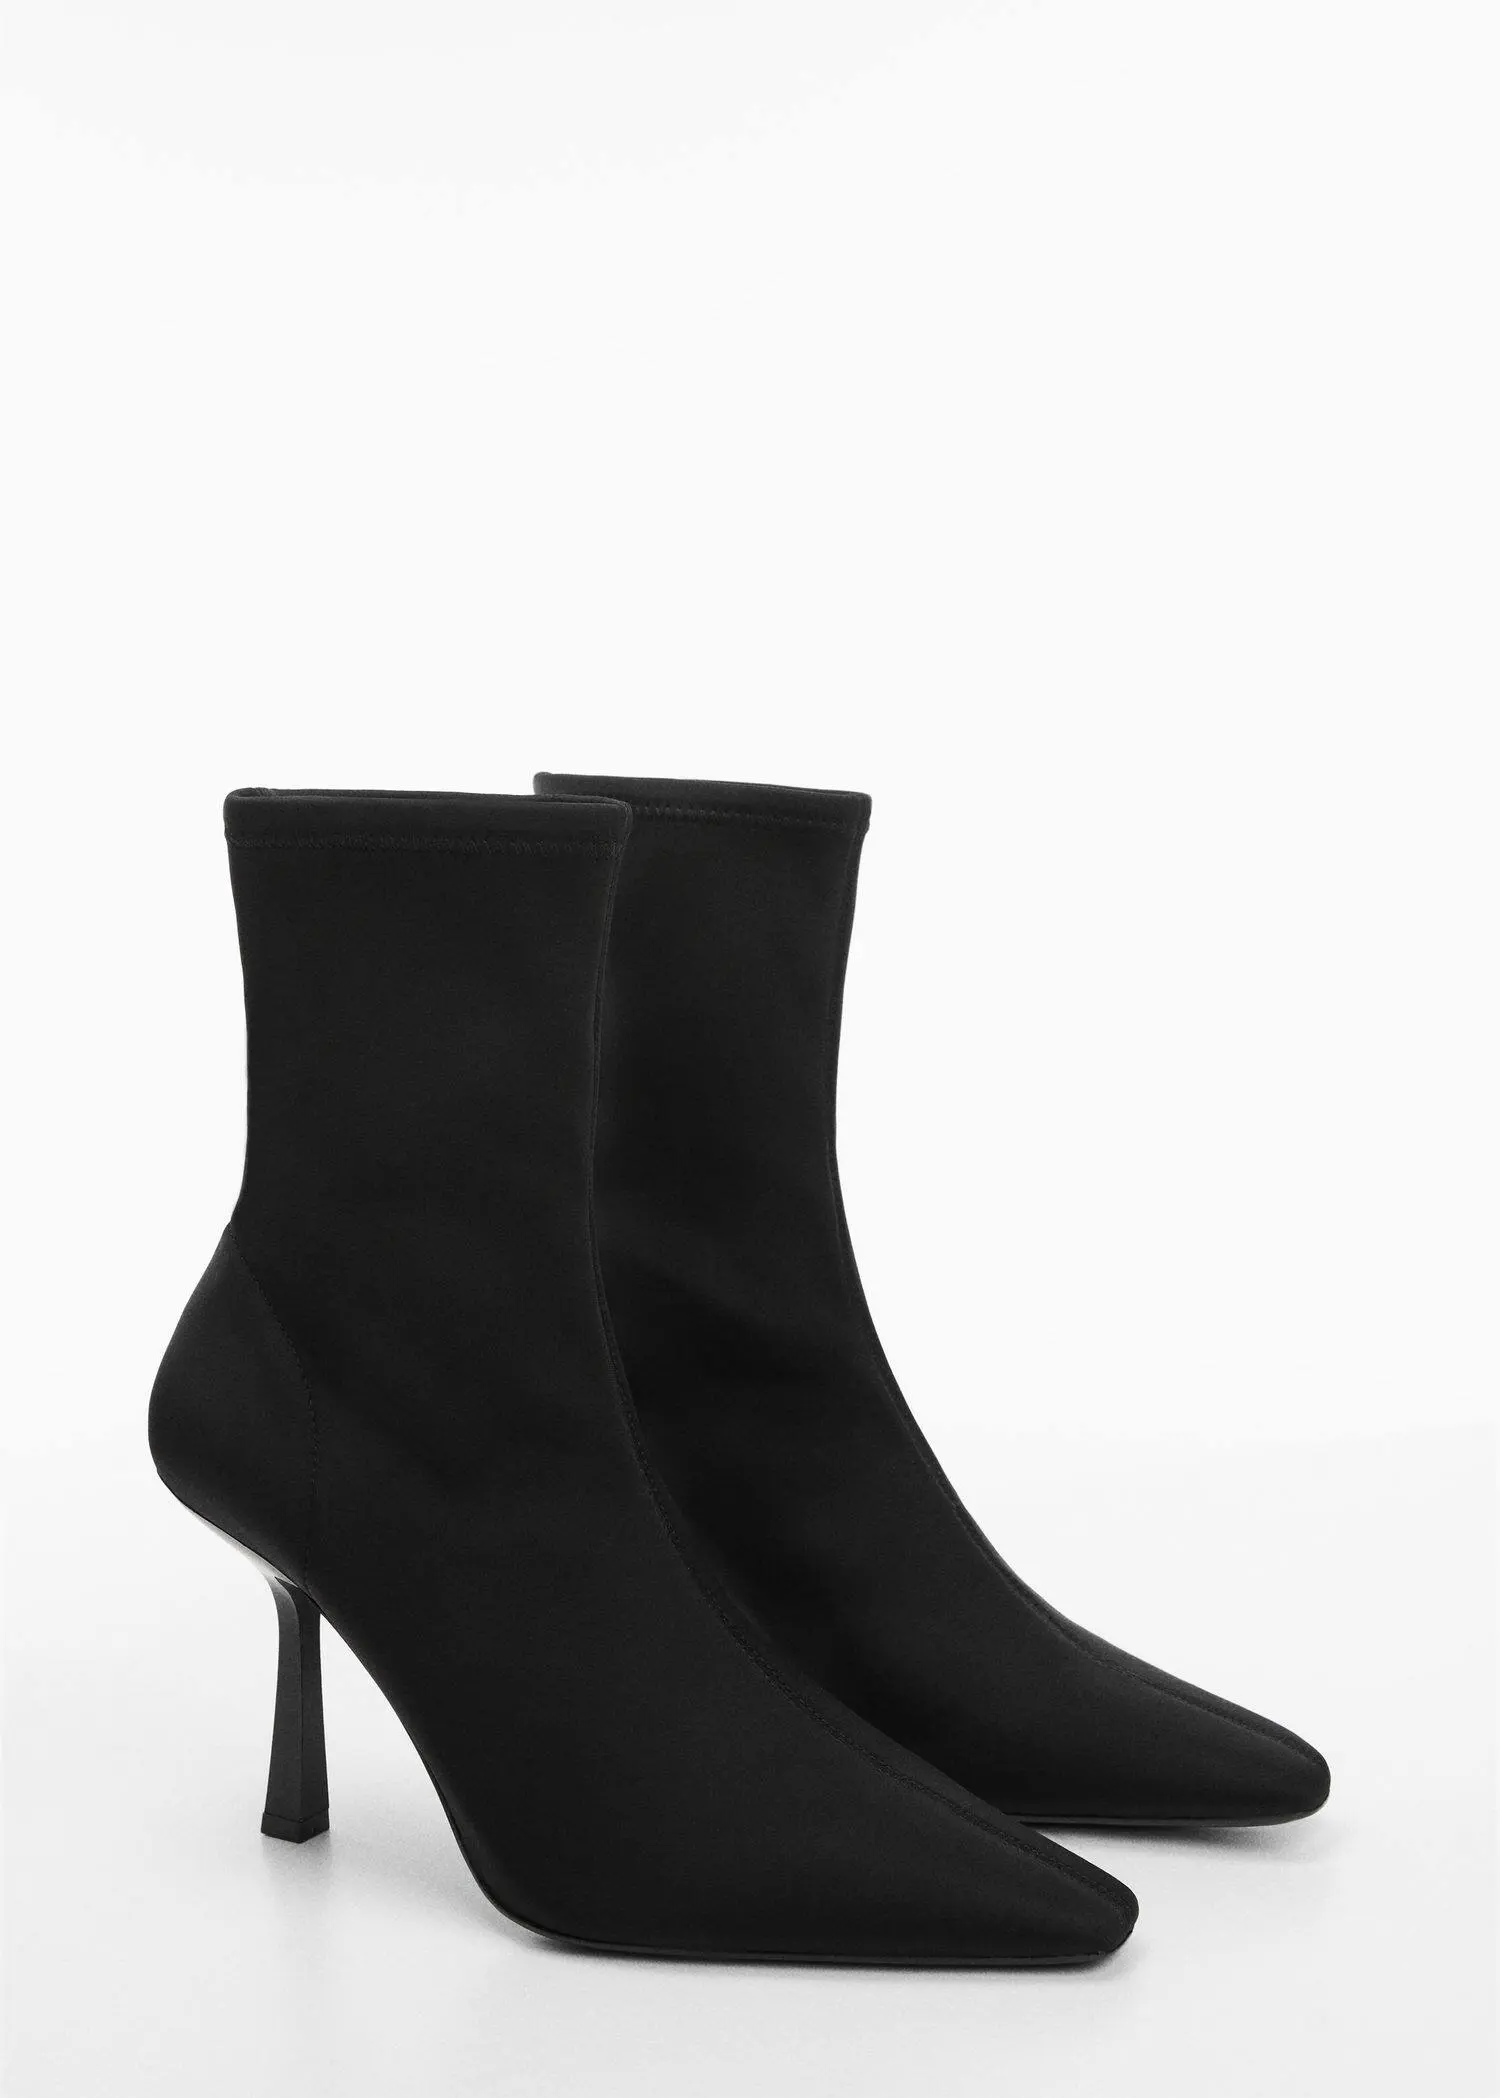 Mango Pointed heel ankle boot. 2